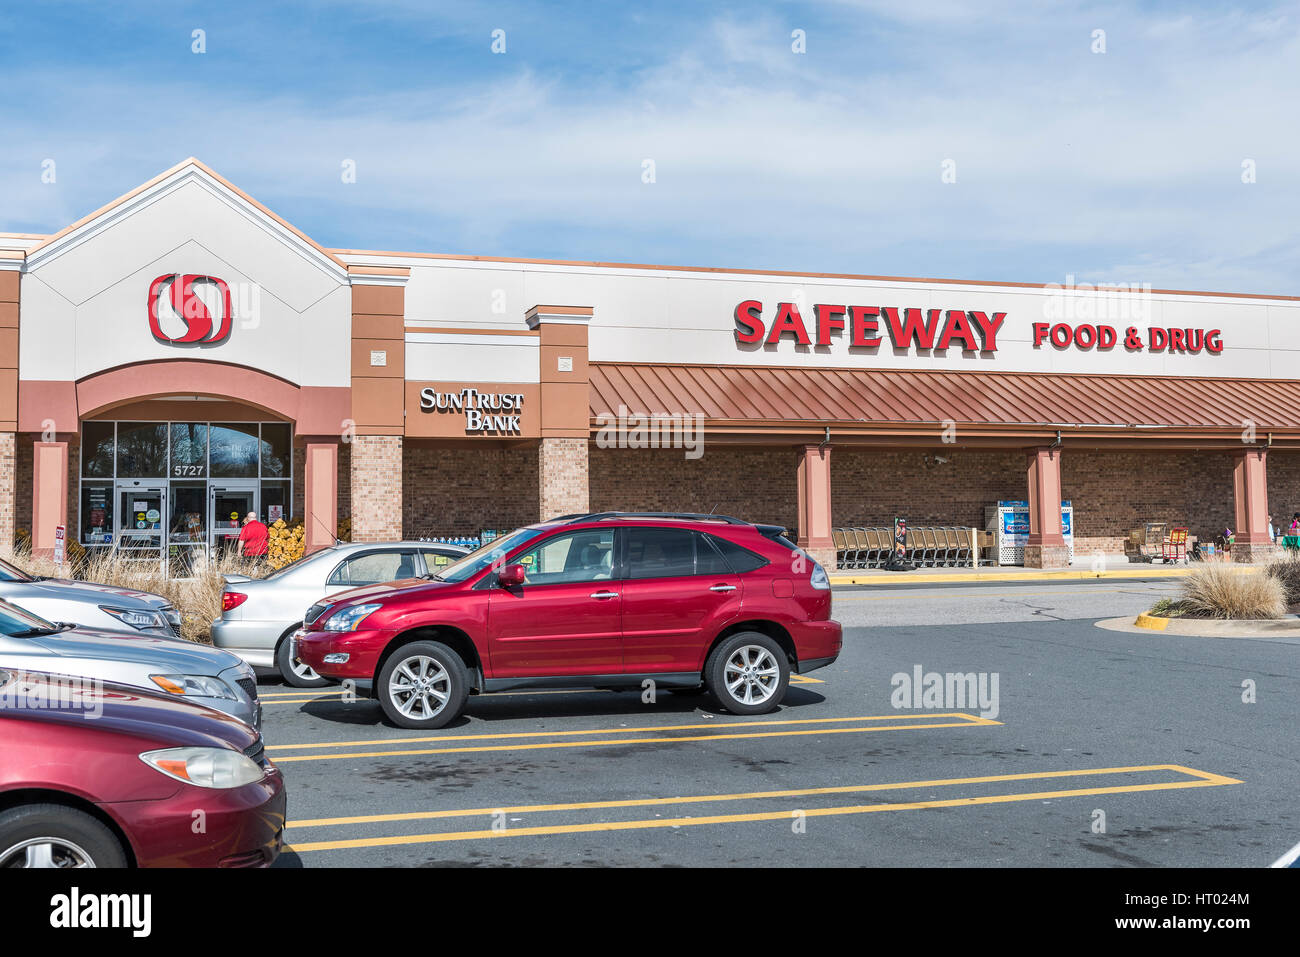 Burke, USA - February 18, 2017: Safeway food and drug store exterior Stock Photo